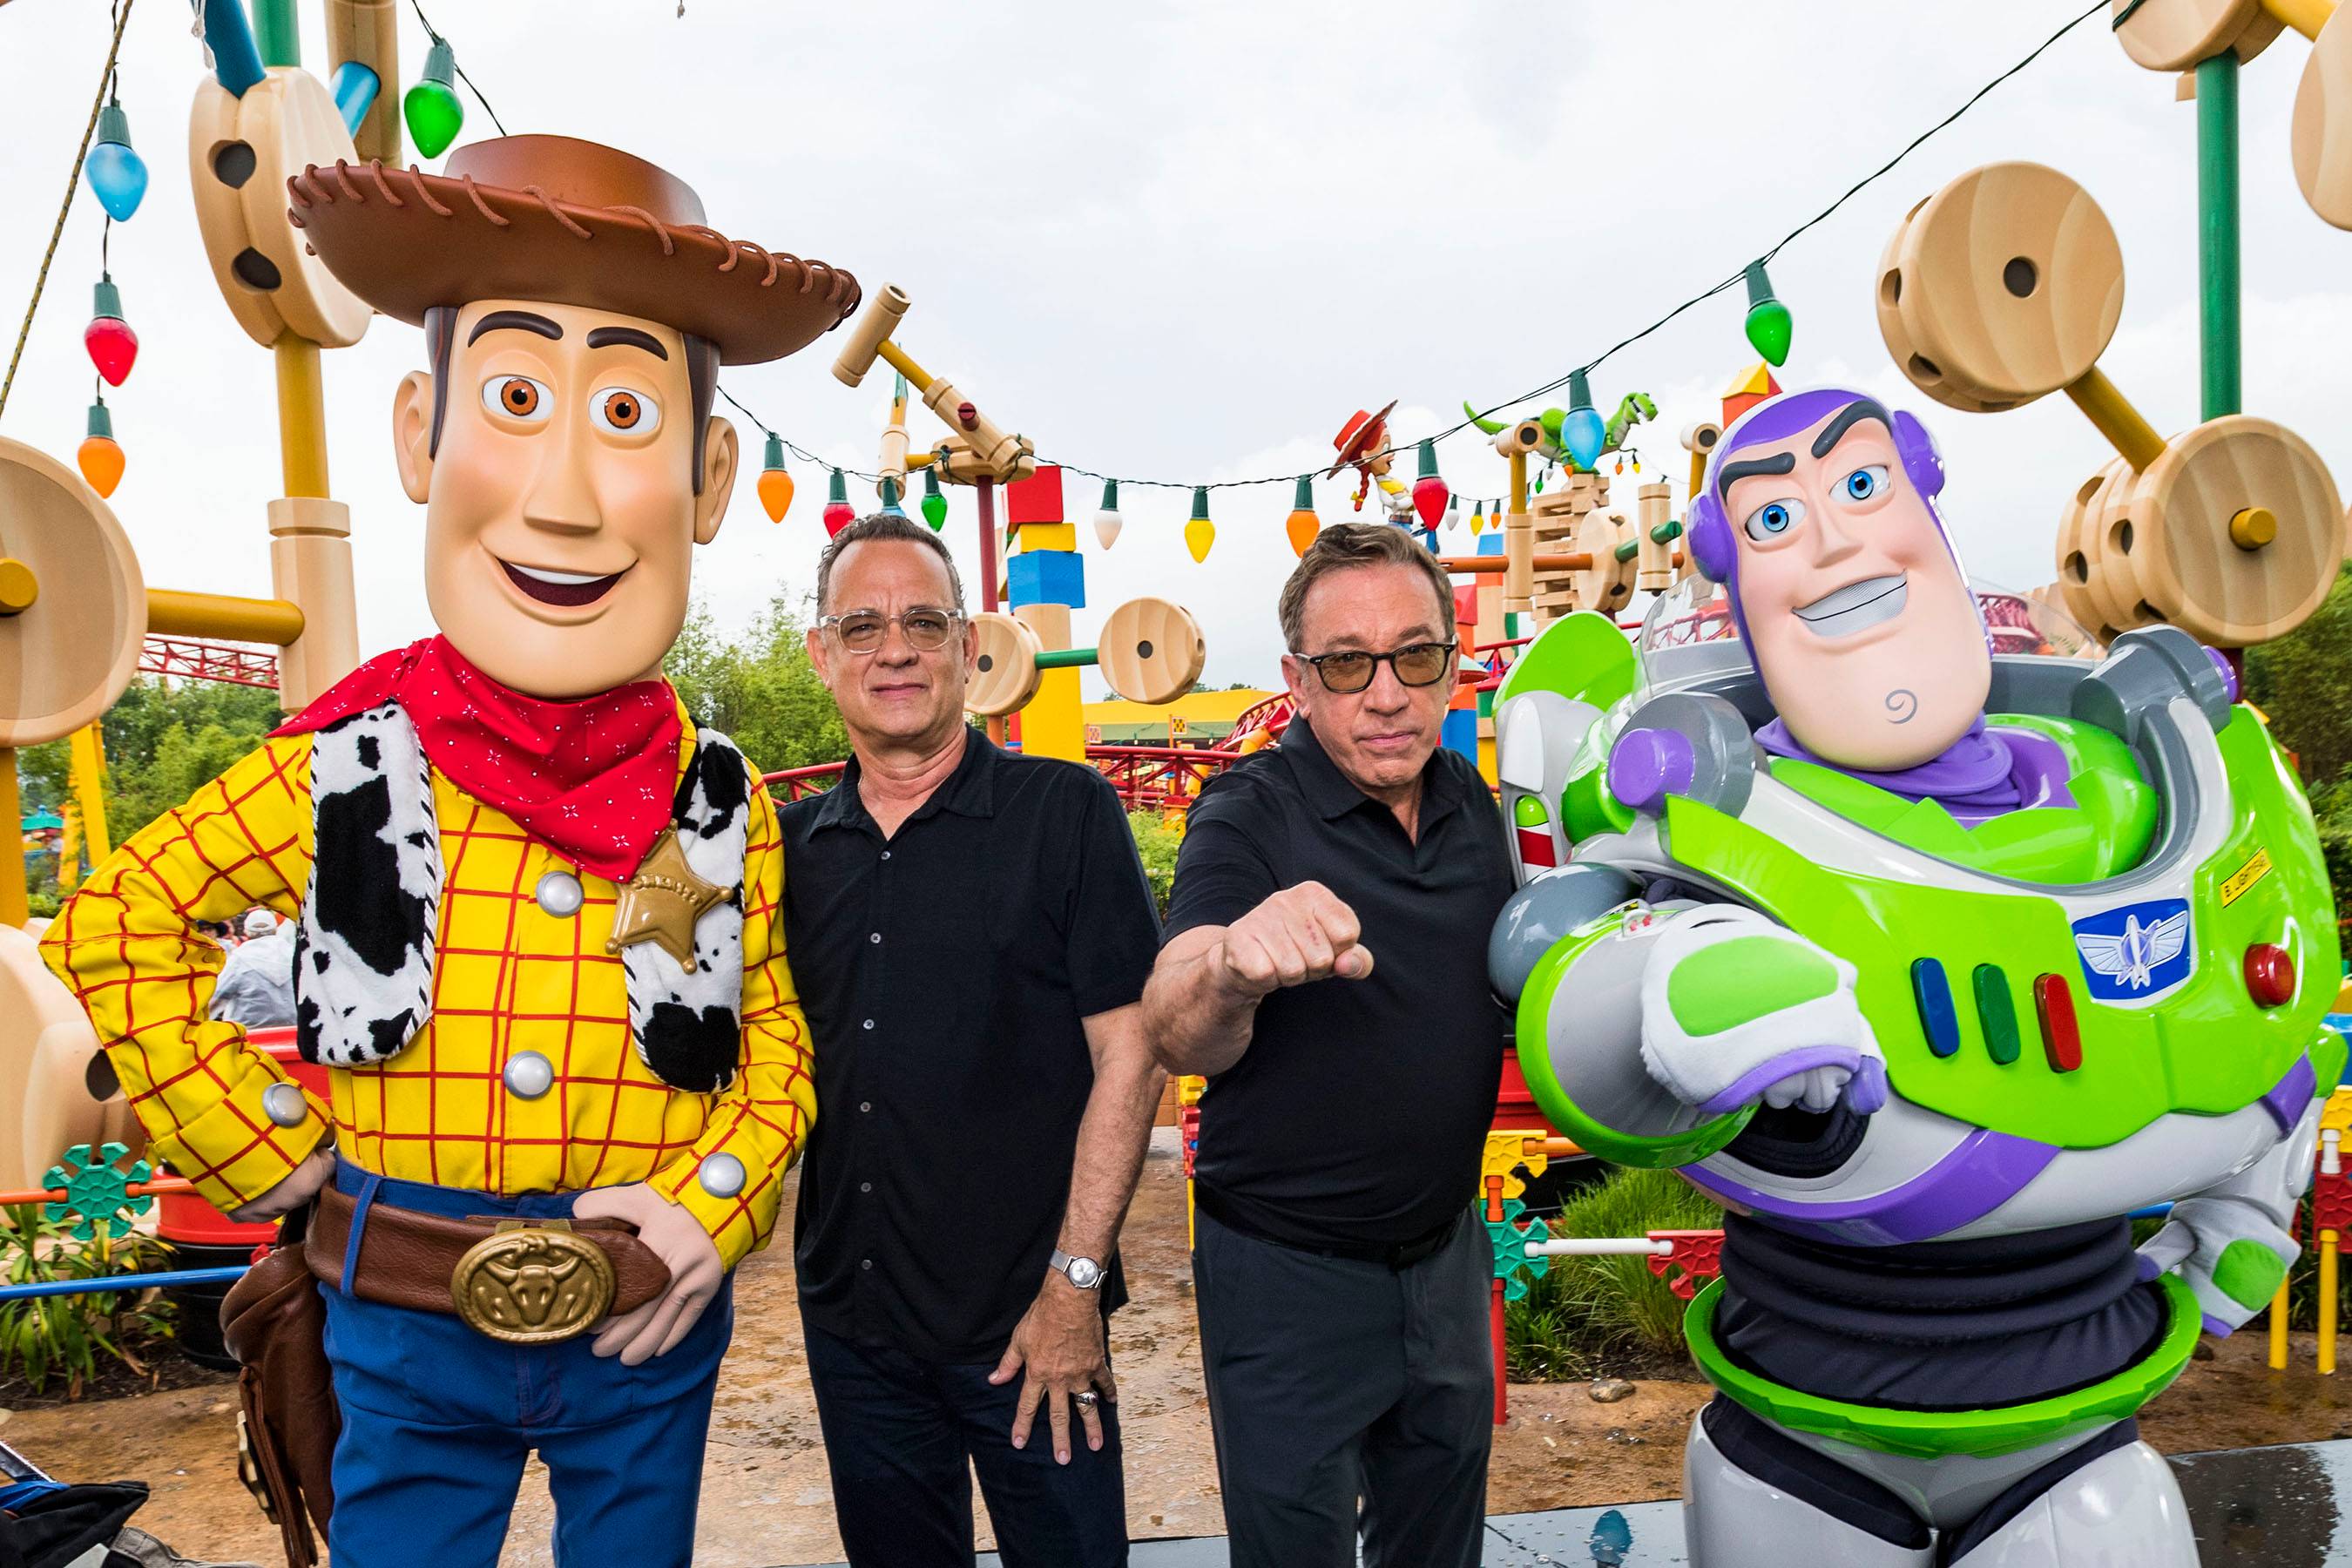 Actors Tom Hanks (center left) and Tim Allen (center right), stars of the Disney•Pixar film “Toy Story 4,” appear with Woody (left) and Buzz Lightyear (right) inside Toy Story Land at Disney's Hollywood Studios